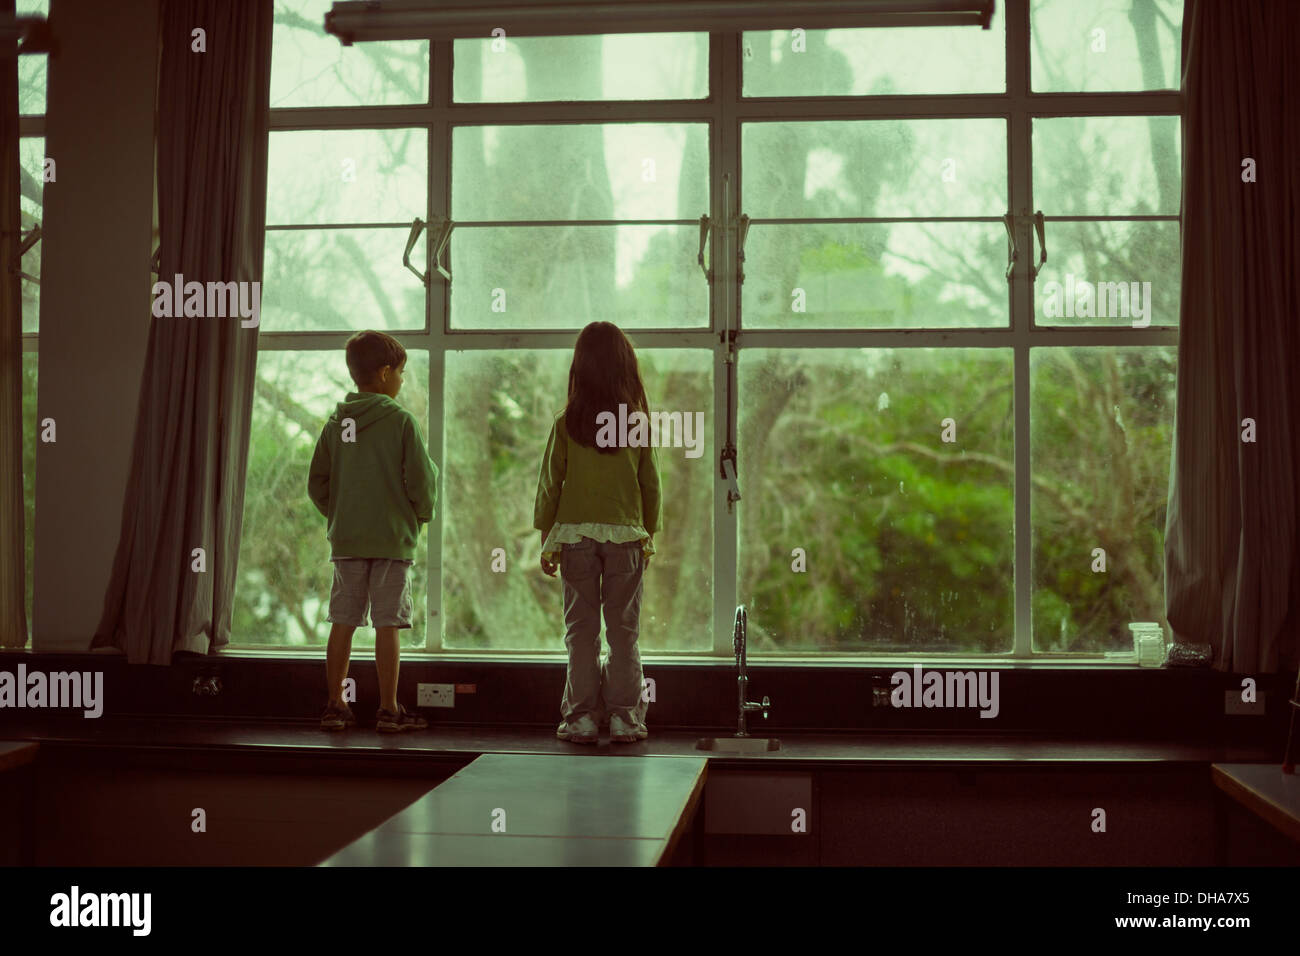 Children stand on bench and look out of large second floor window at trees. Stock Photo